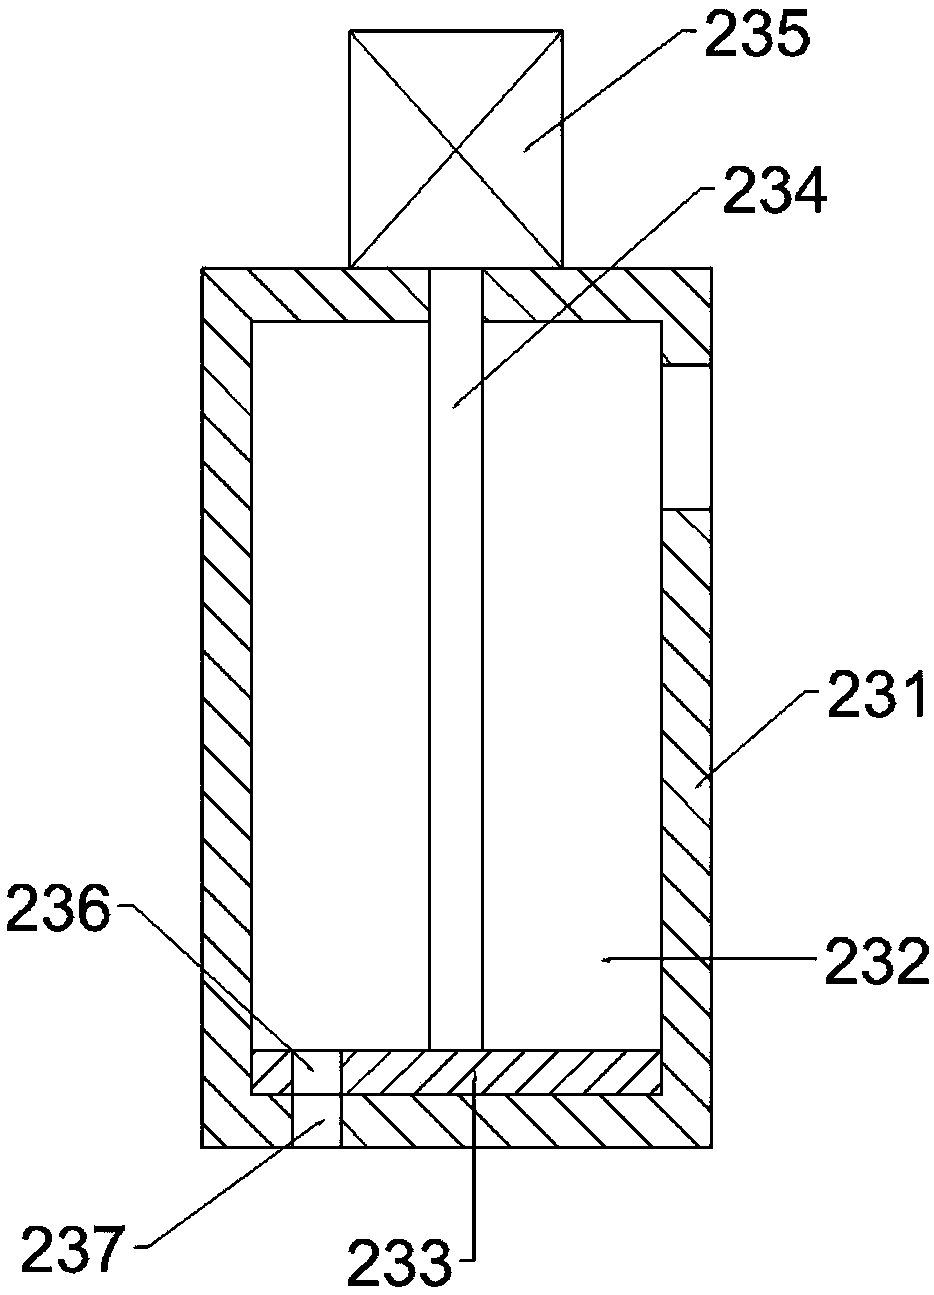 Device with sowing function for municipal engineering